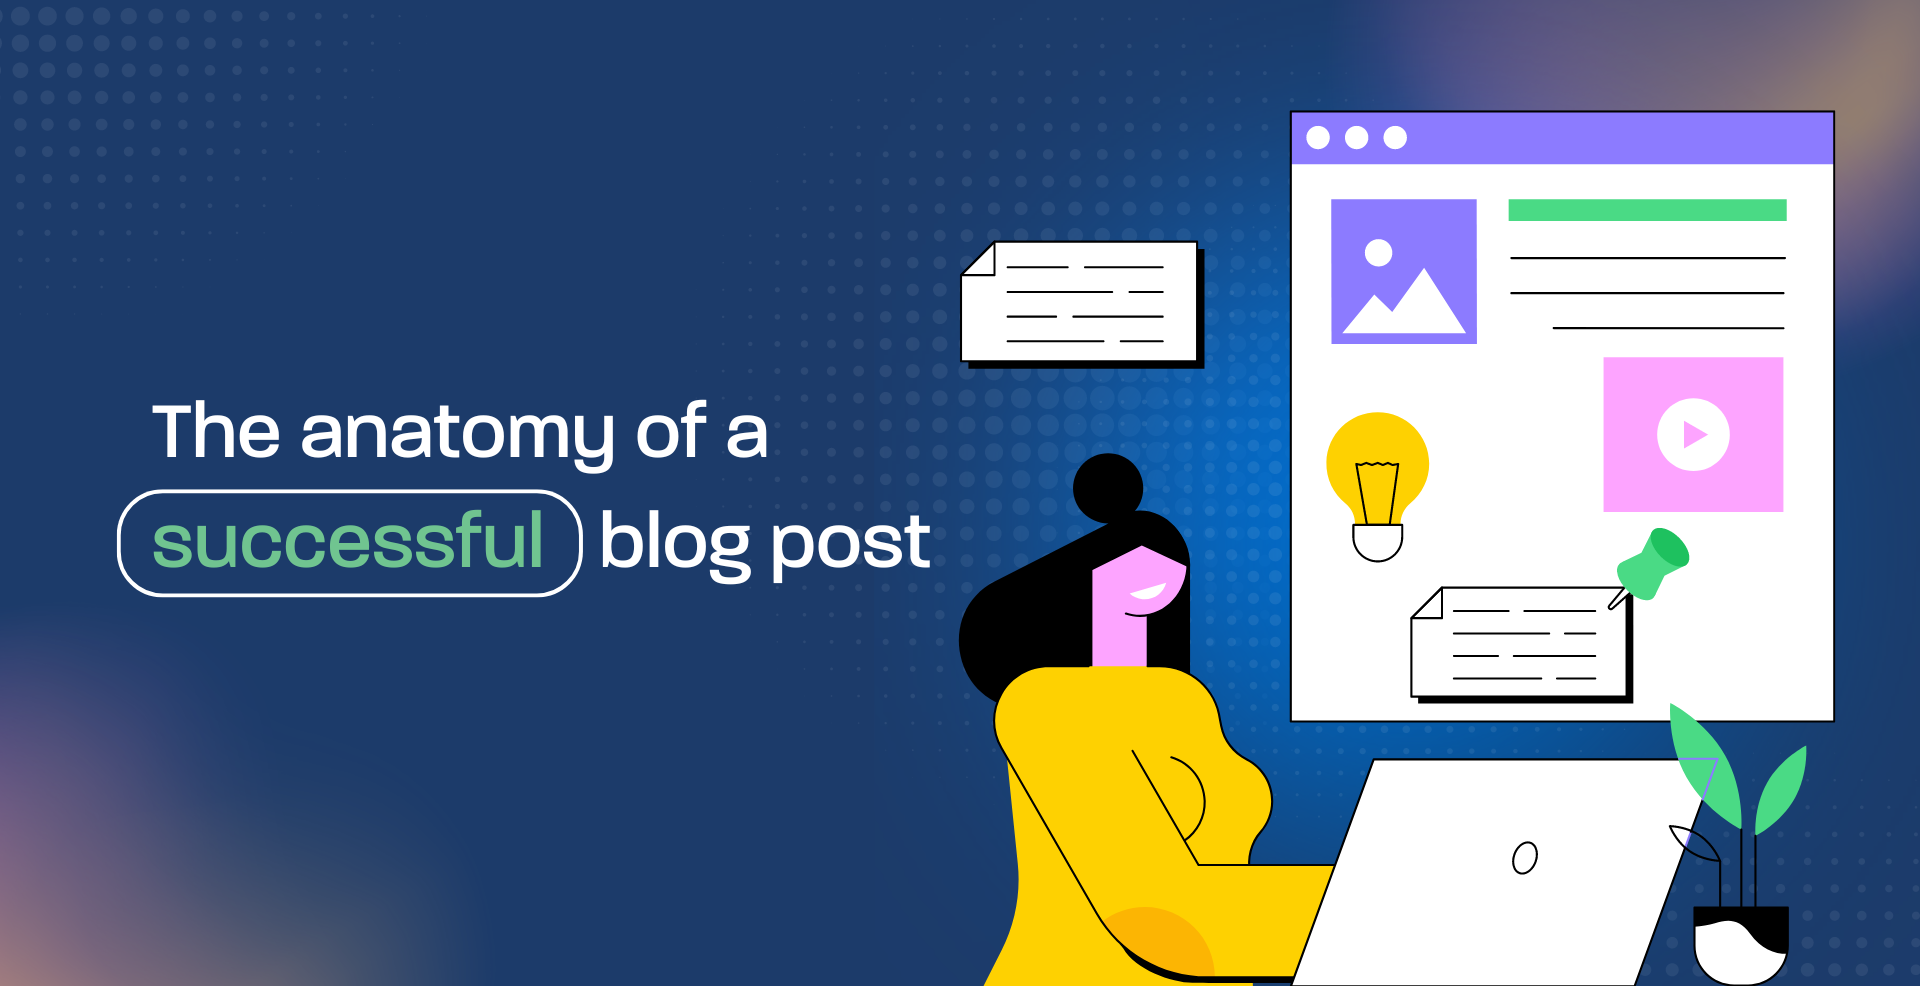 The anatomy of a successful blog post